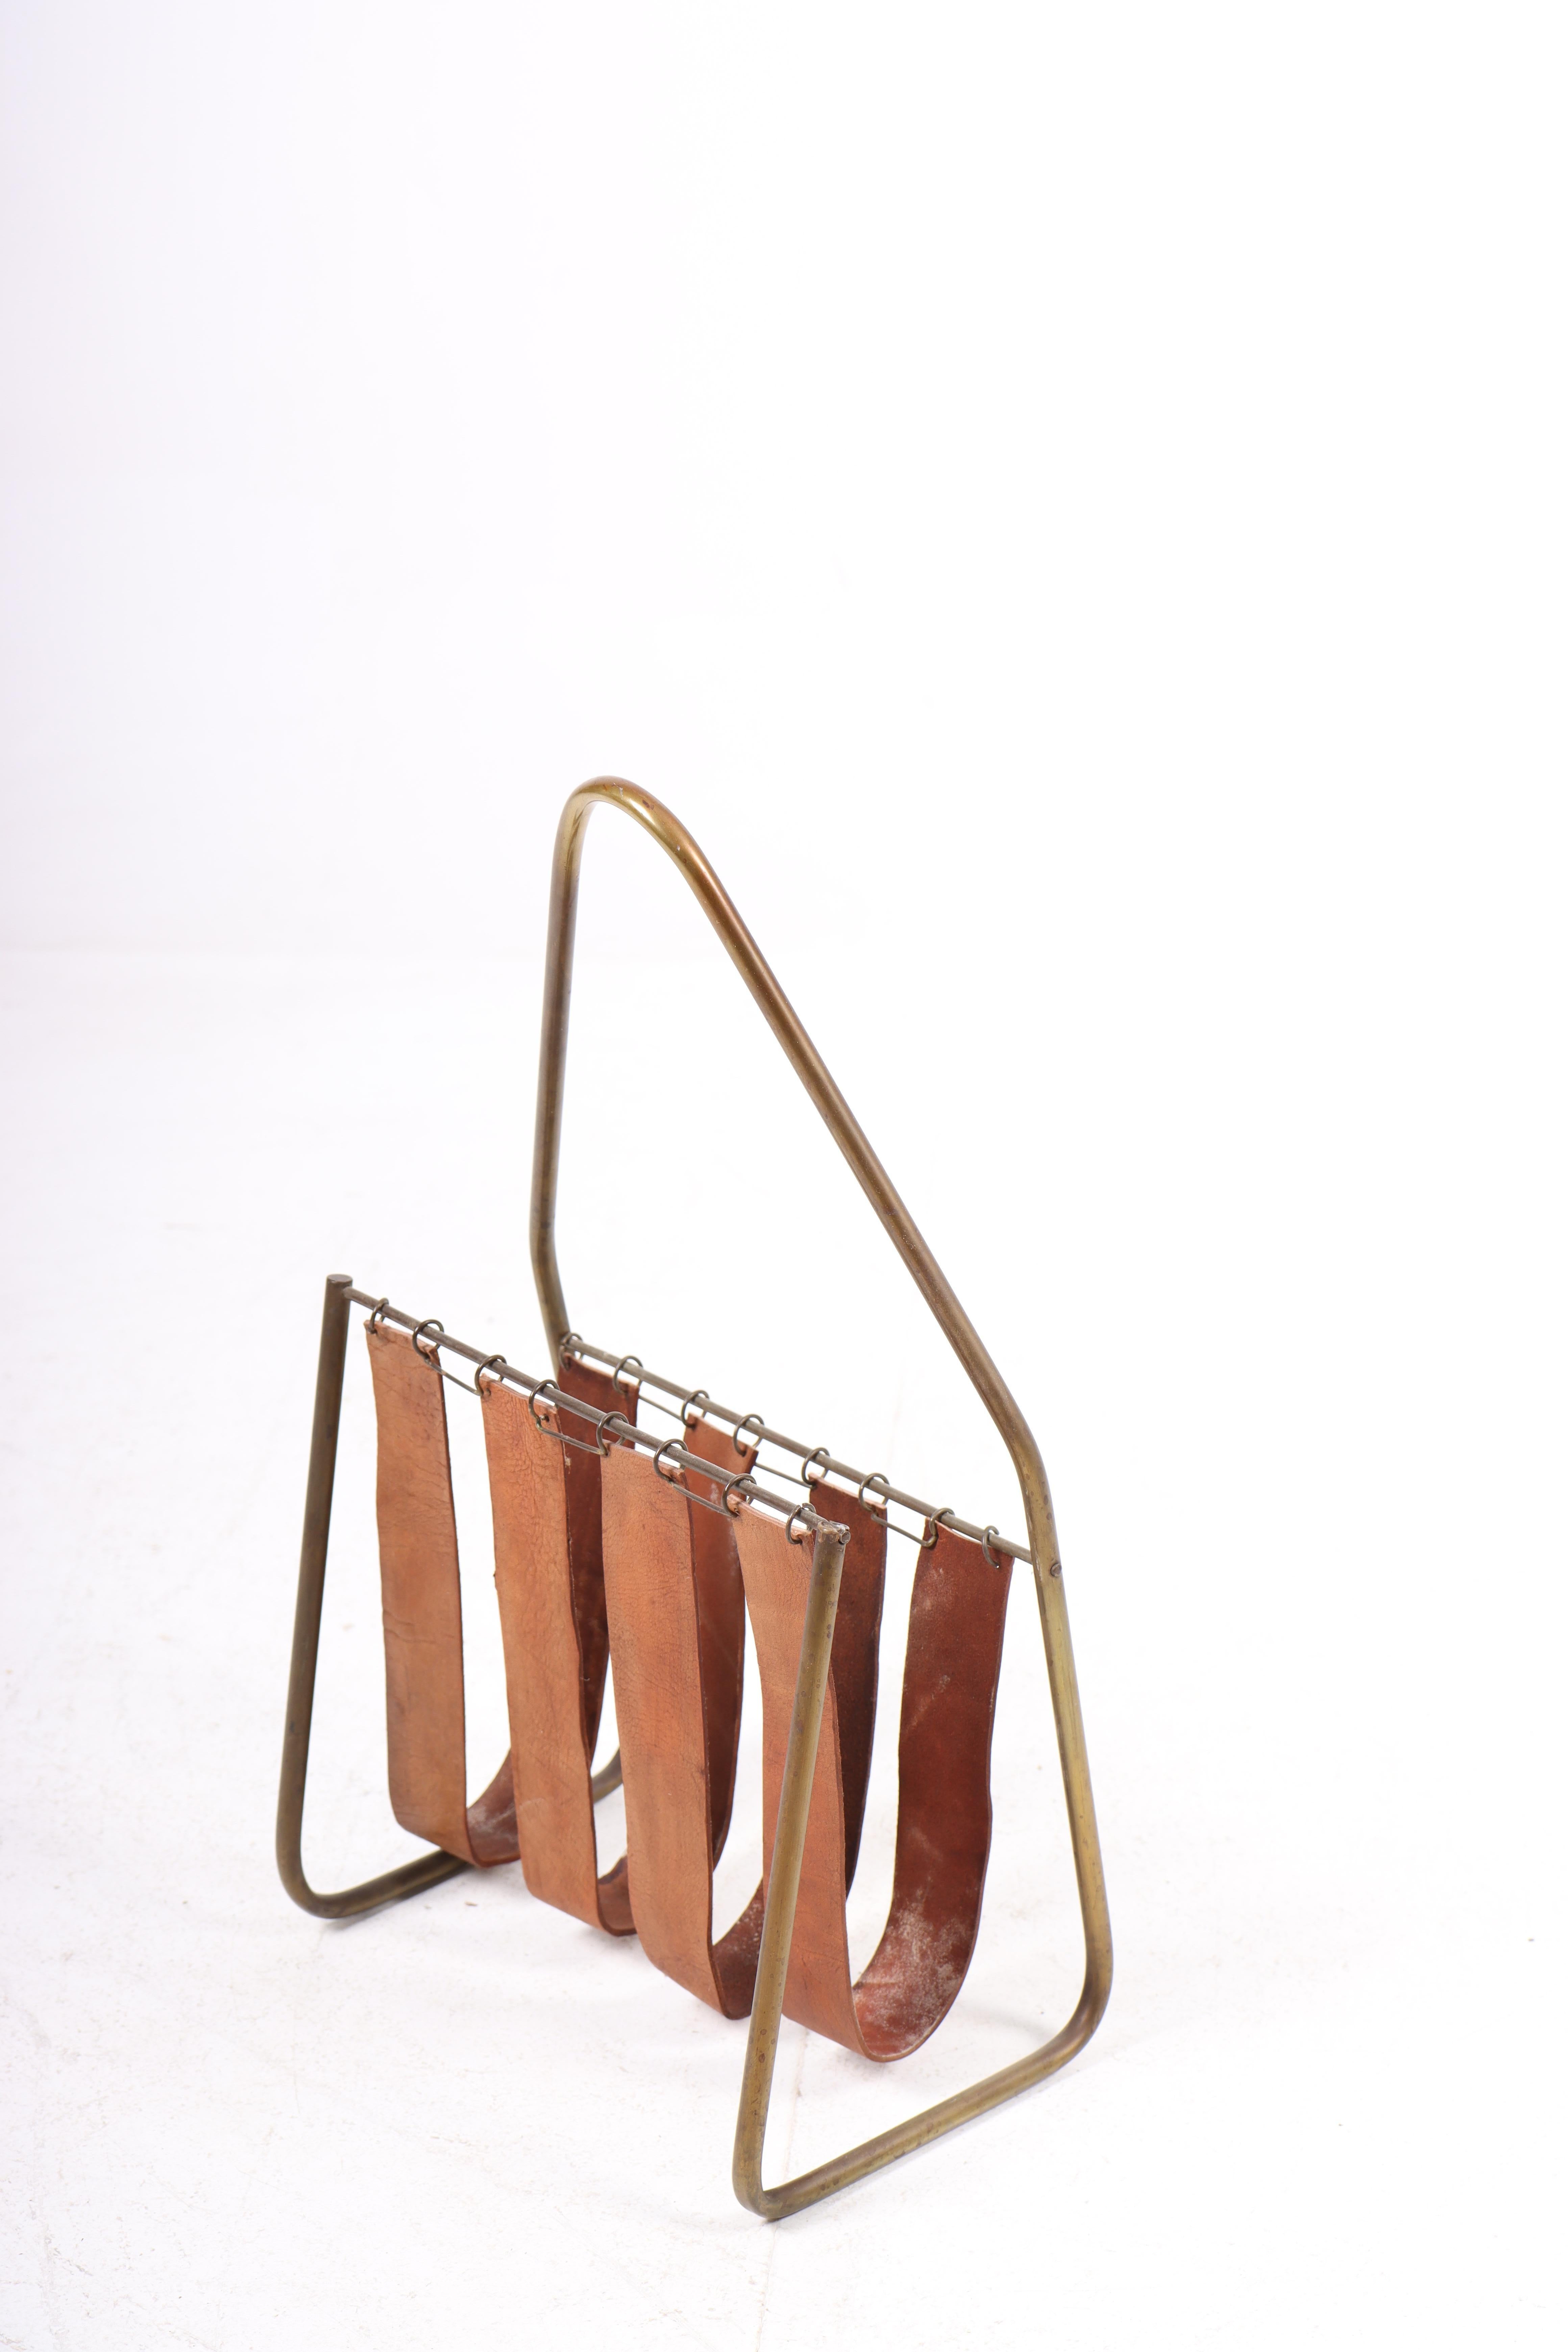 Austrian Magazine Stand in Patinated Leather and Brass by Illums Bolighus, 1950s For Sale